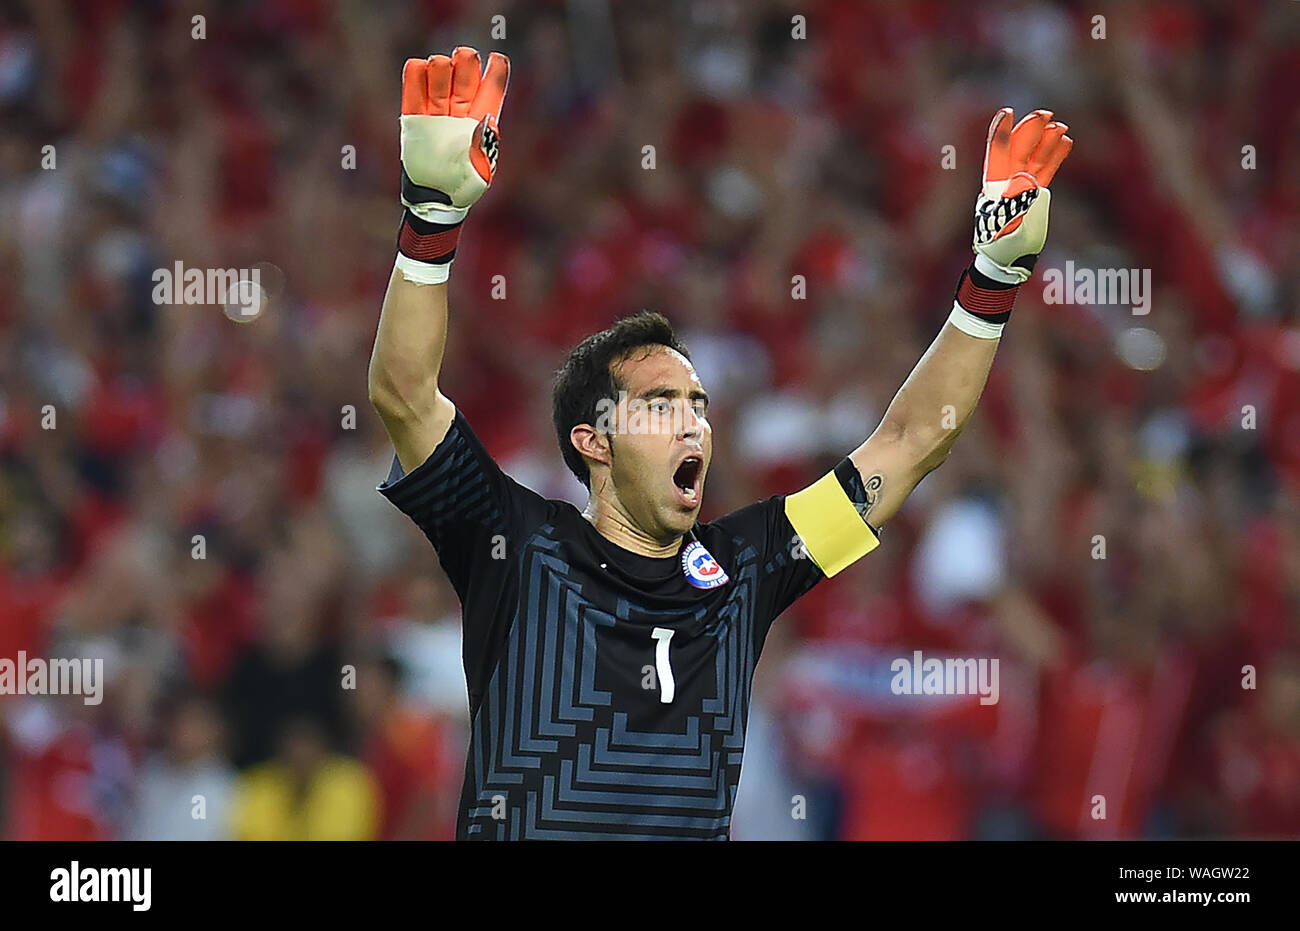 Rio de Janeiro, June 18, 2014. Soccer goalkeeper Claudio Bravo, during the match between Spain vs Chile, for the 2014 World Cup at the Maracanã Stadiu Stock Photo